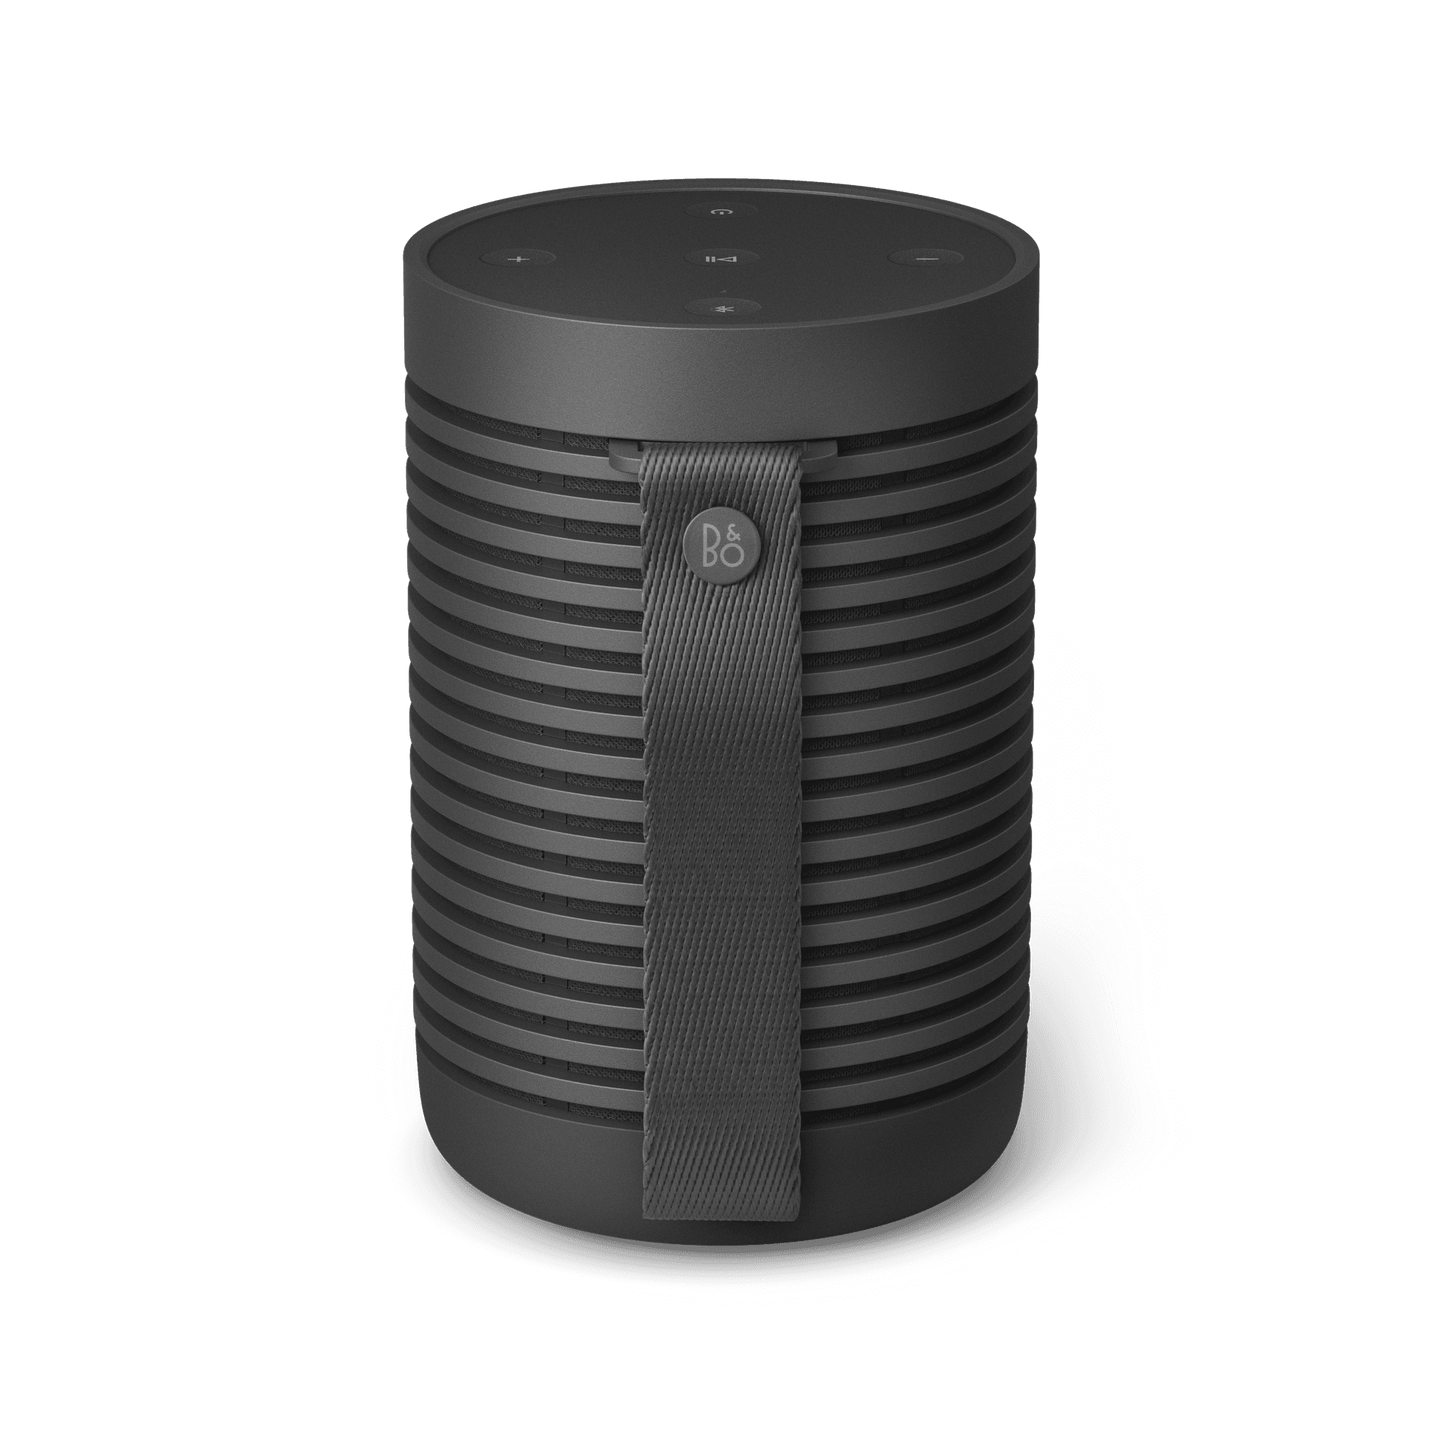 B&O Beosound Explore Portable Speaker - The Luxury Promotional Gifts Company Limited